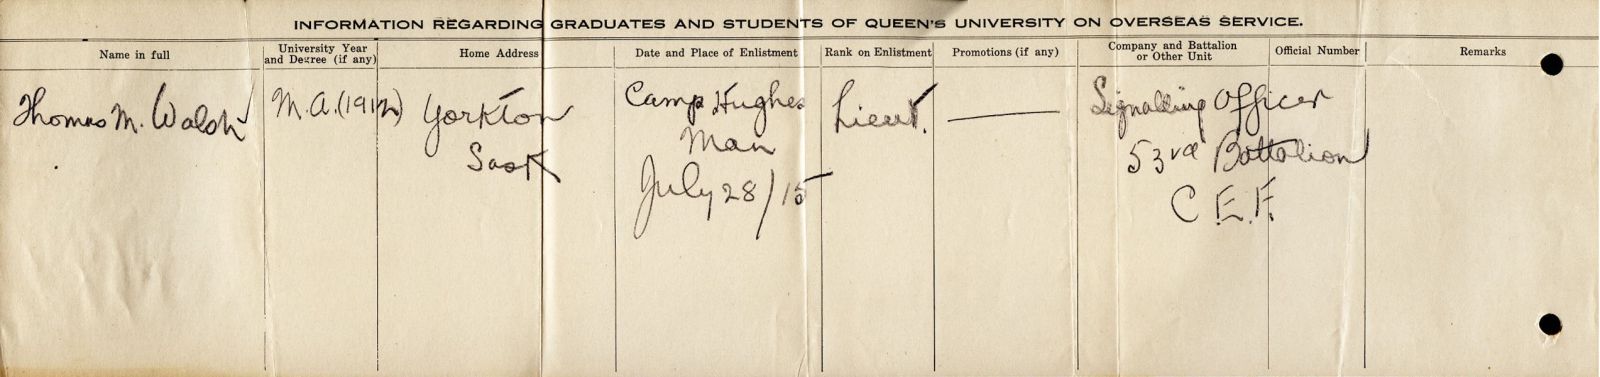 University Overseas Service Record of Walsh